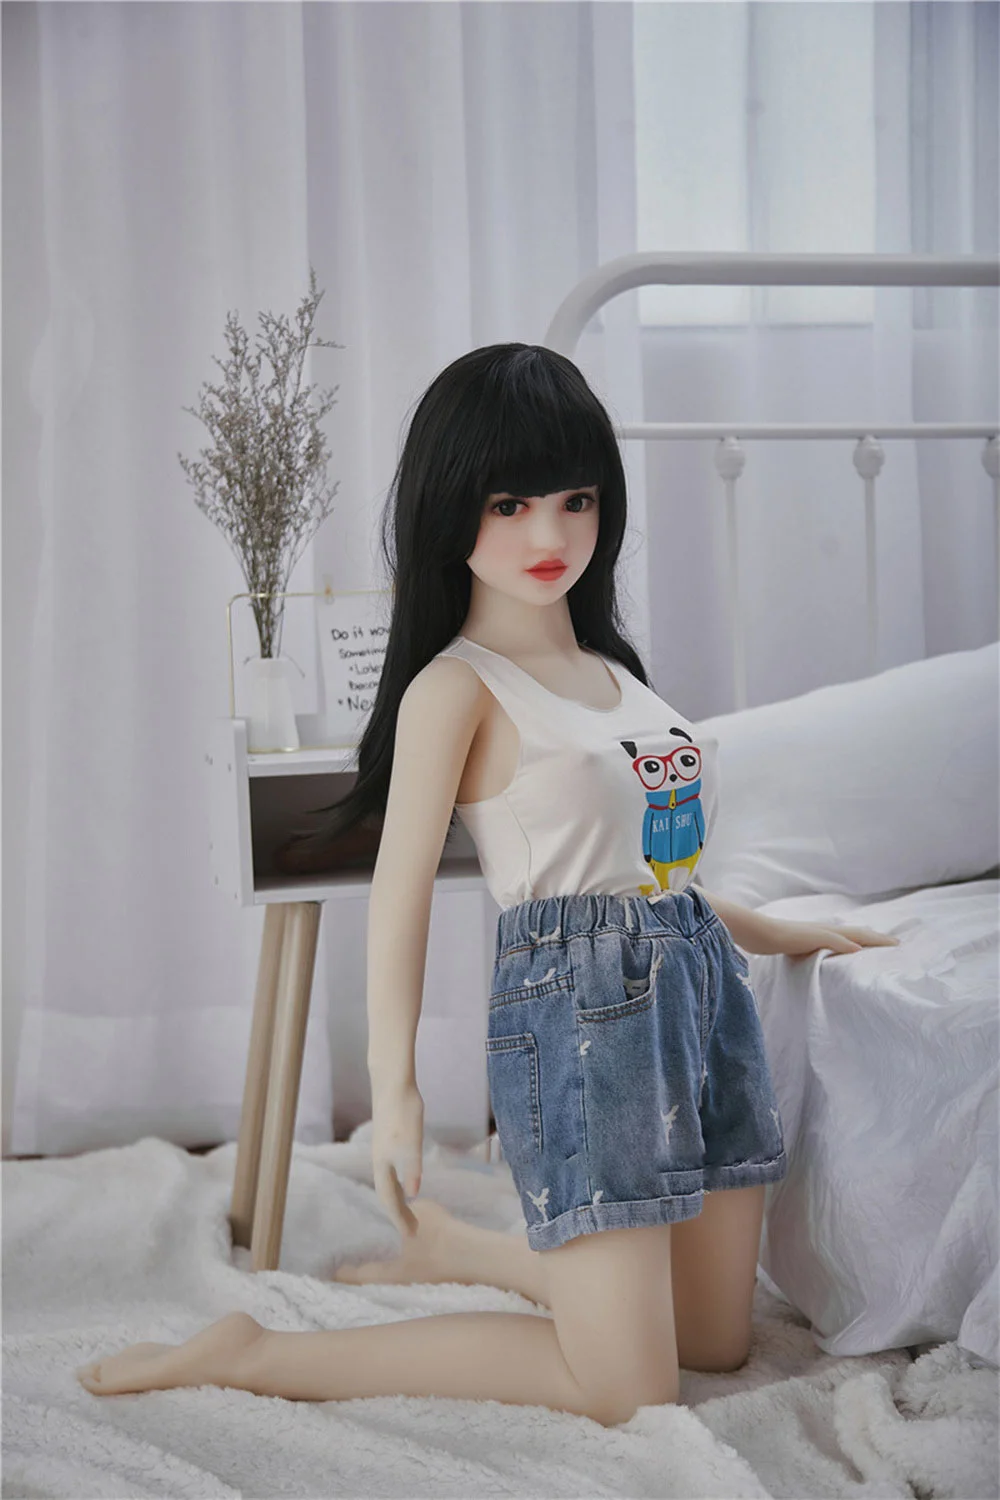 A mini sex doll kneeling on the ground with hands on the bed